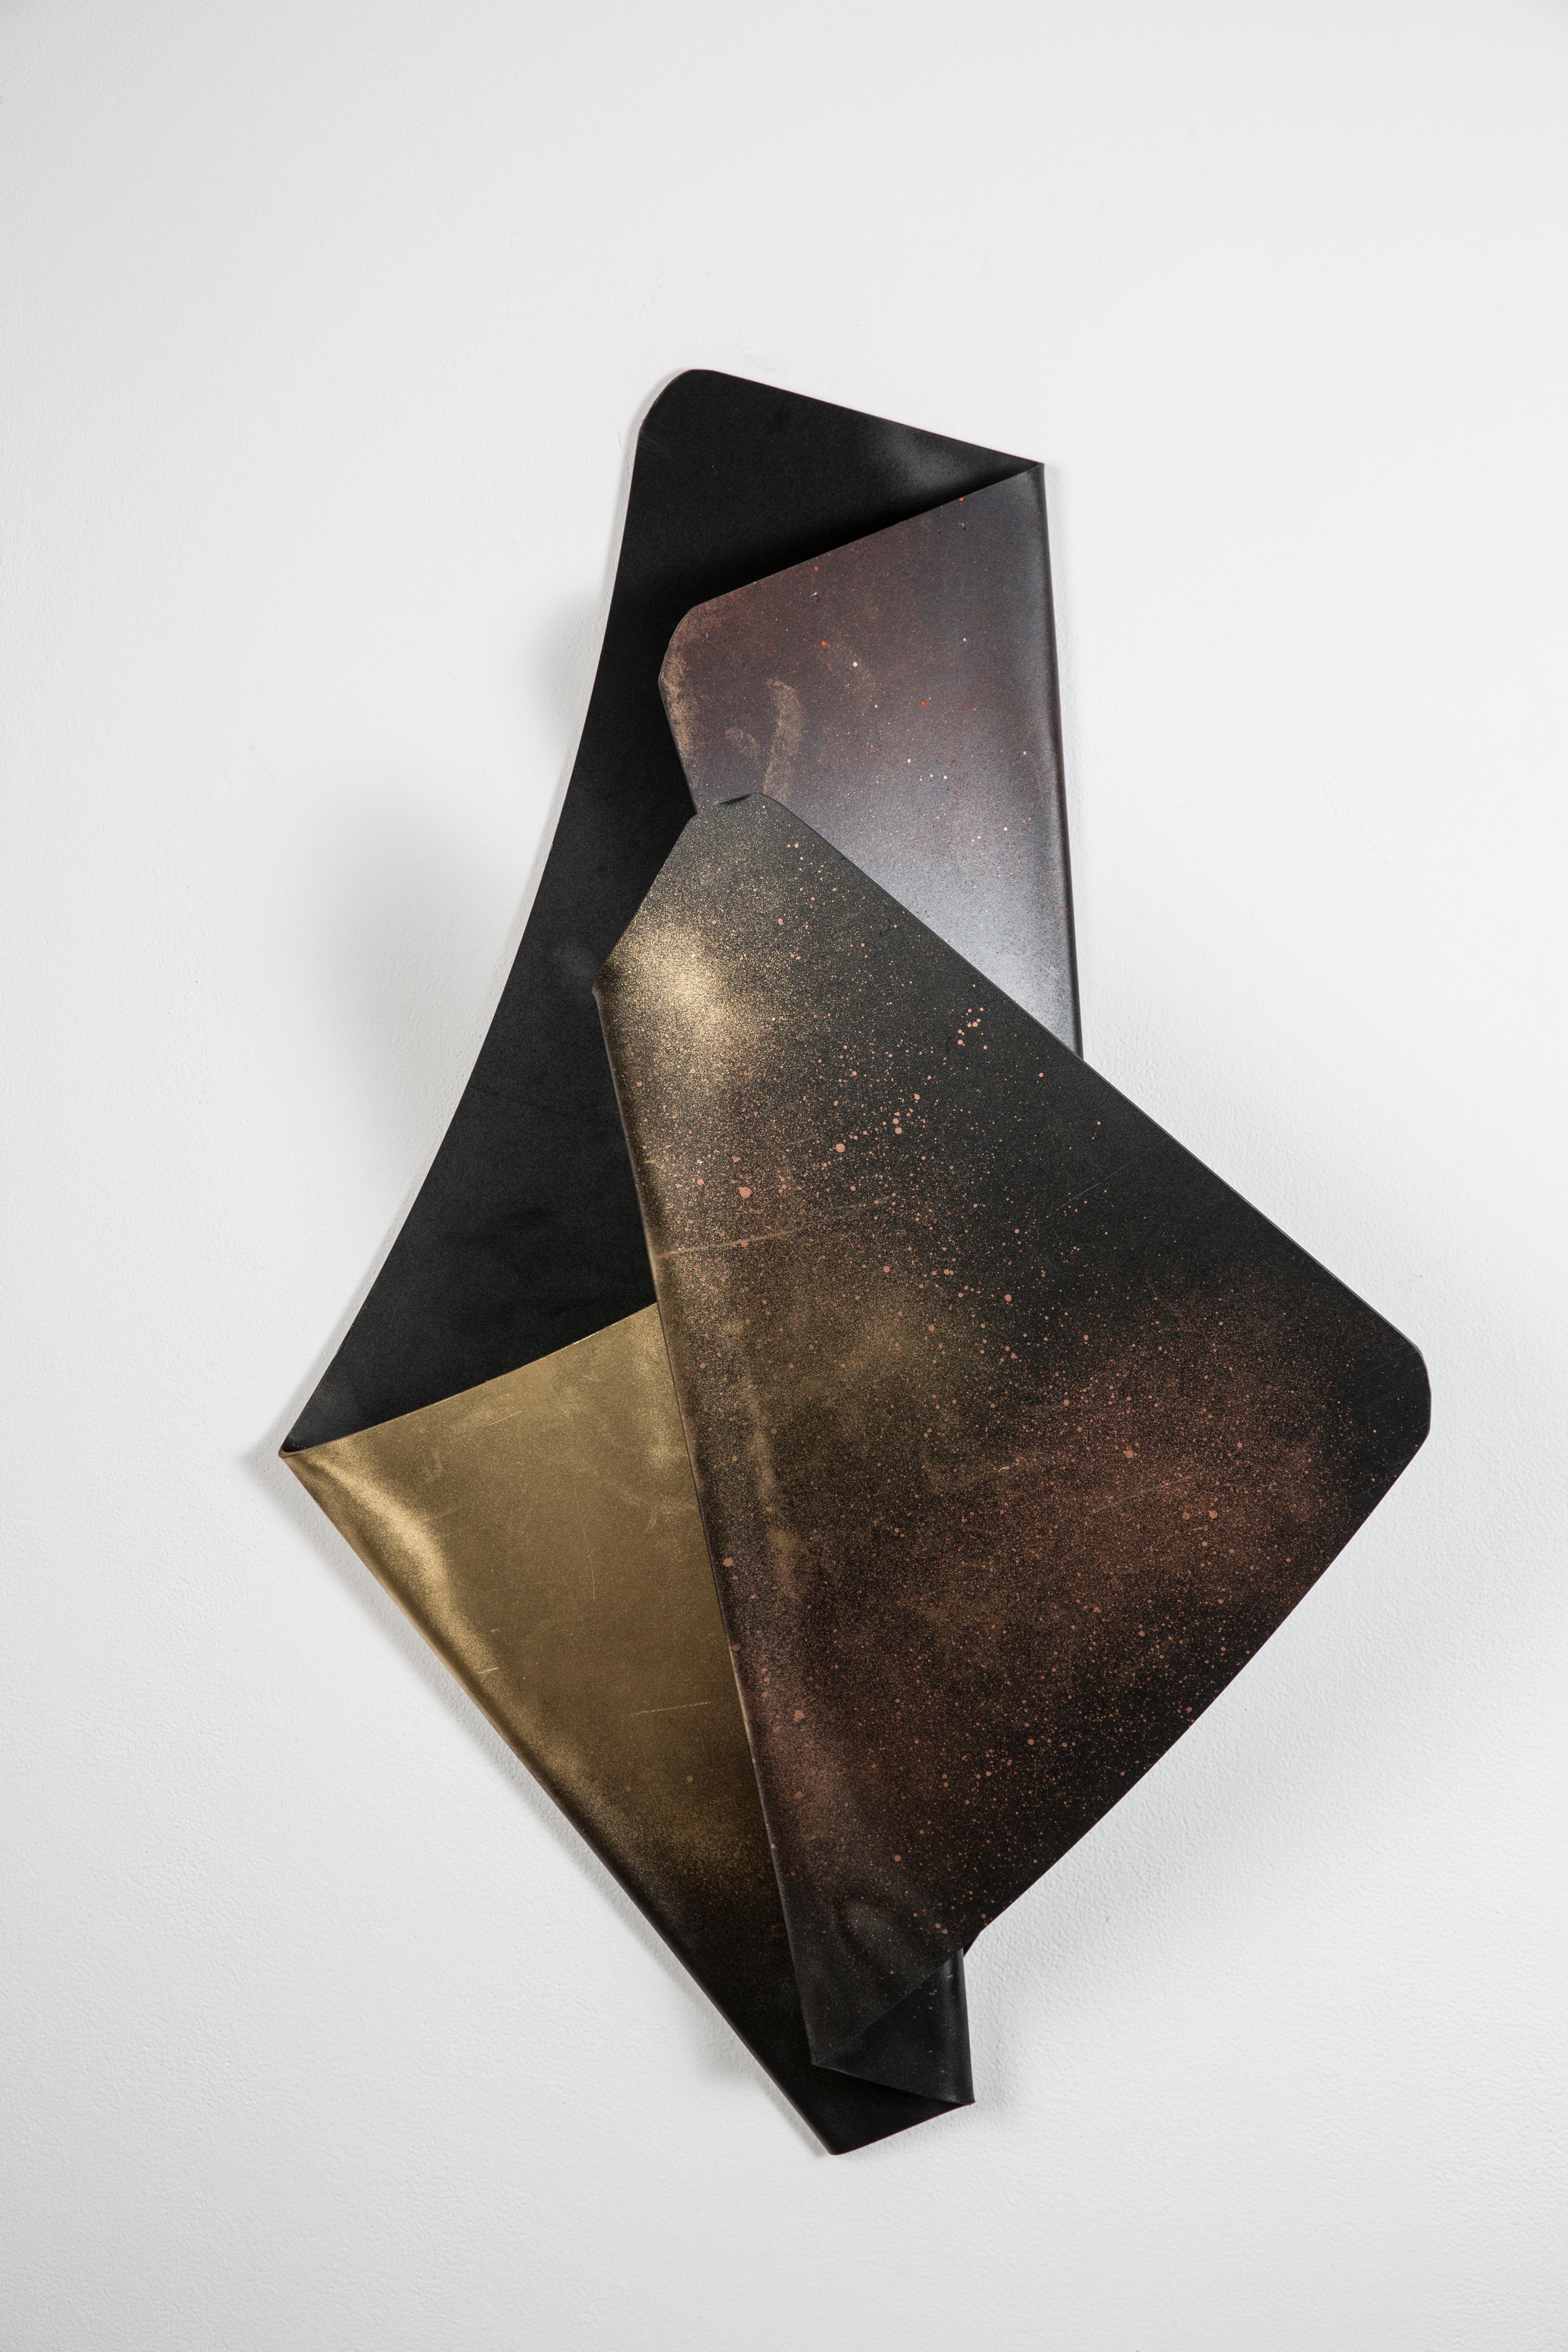 Andrès Bustamante Abstract Sculpture - Vuelve A Anochecer - Acrylic Polymer Wall Hanging Sculpture, Black and Gold